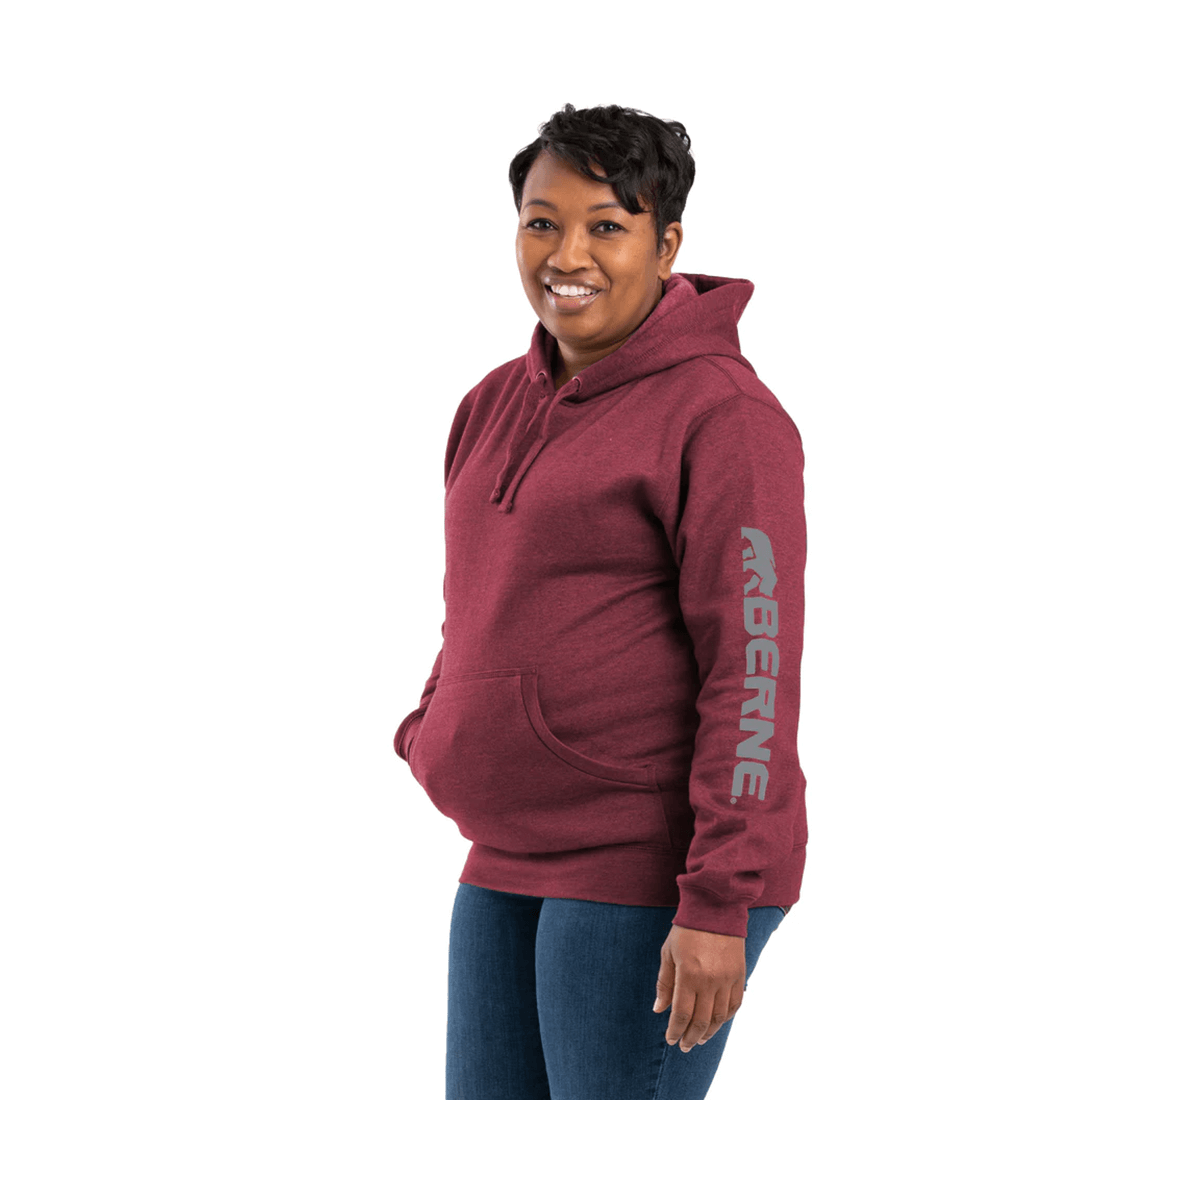 Berne Women's Signature Sleeve hooded Pullover - Cabernet